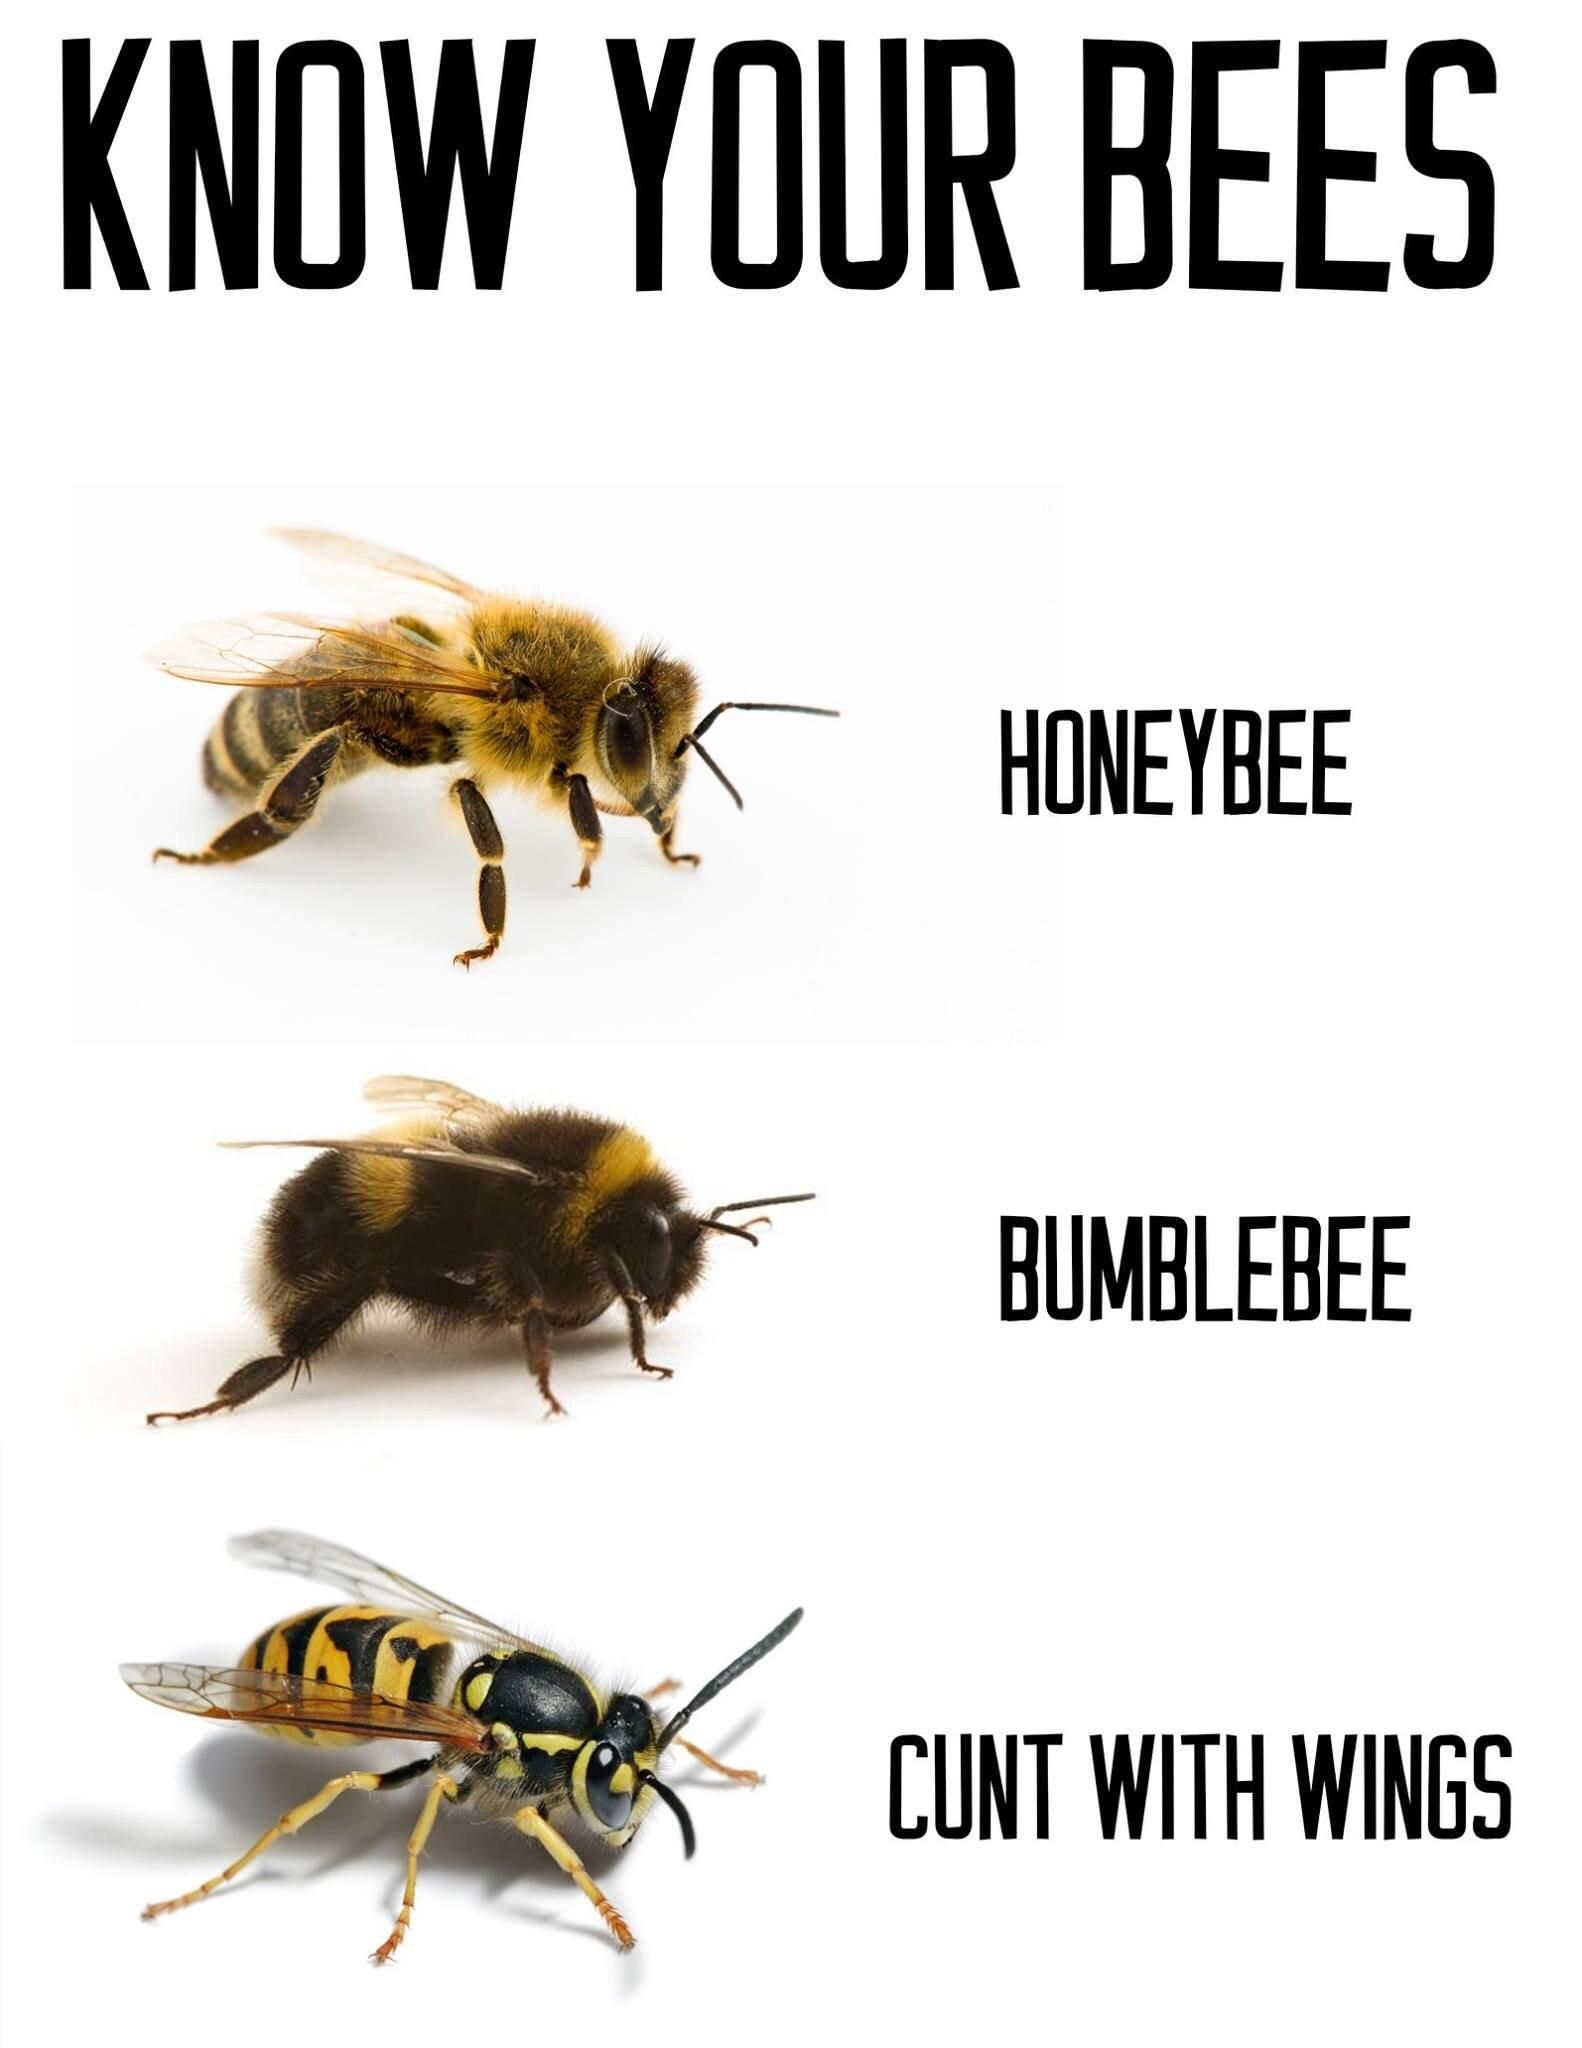 Know your bees people!